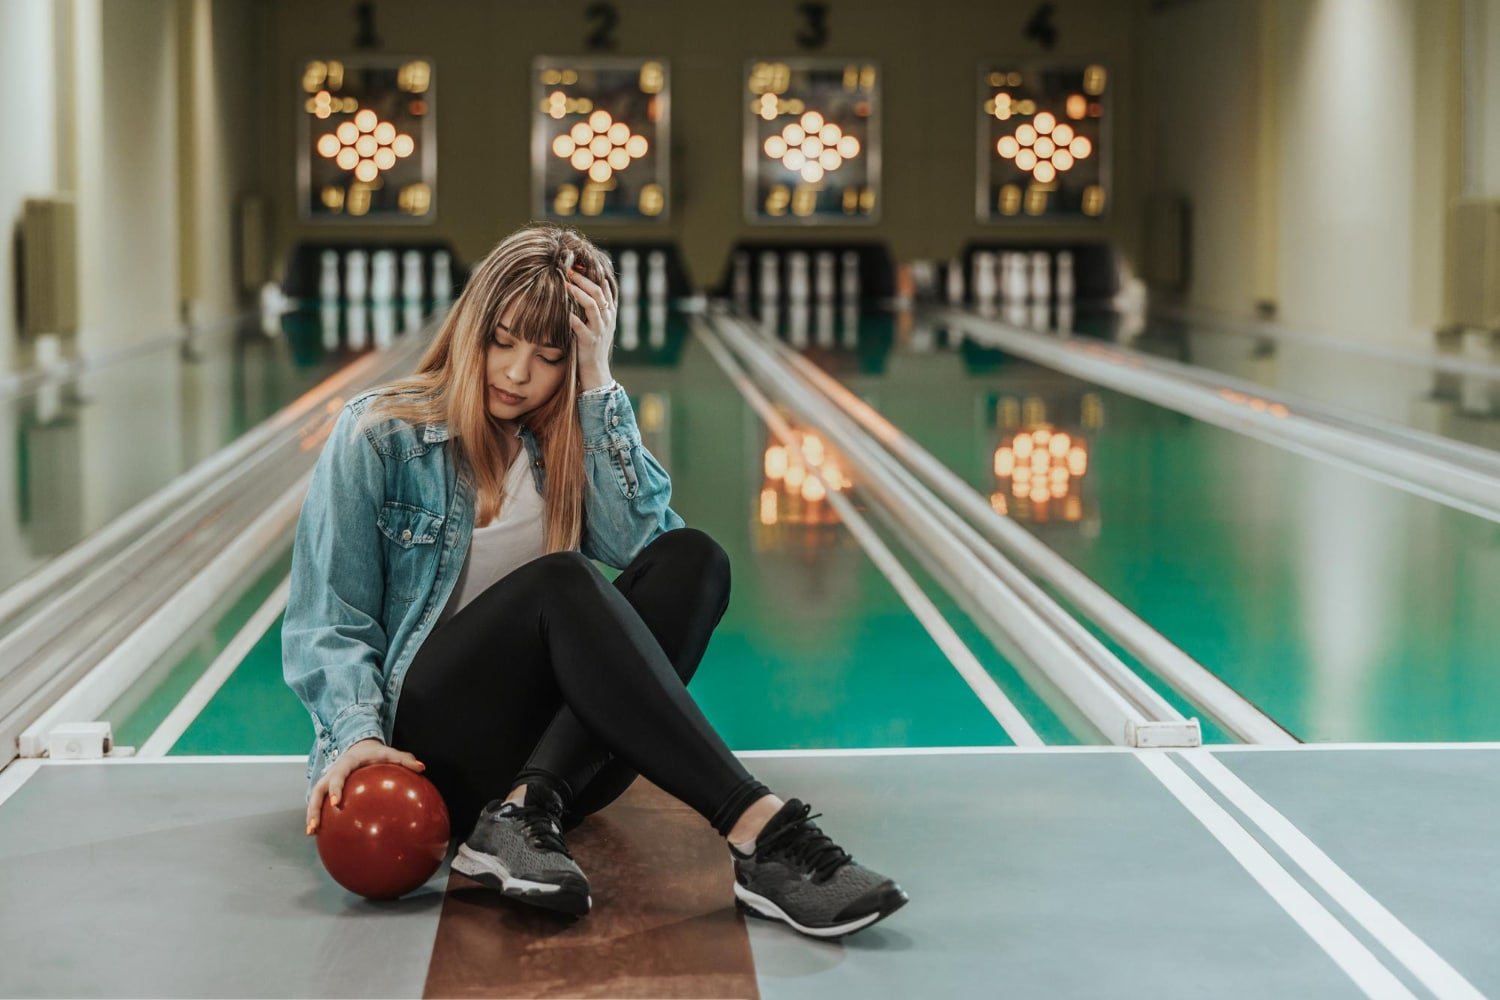 Stay Cool And Stylish On The Lanes With Coolwick.com’s Performance Bowling Apparel